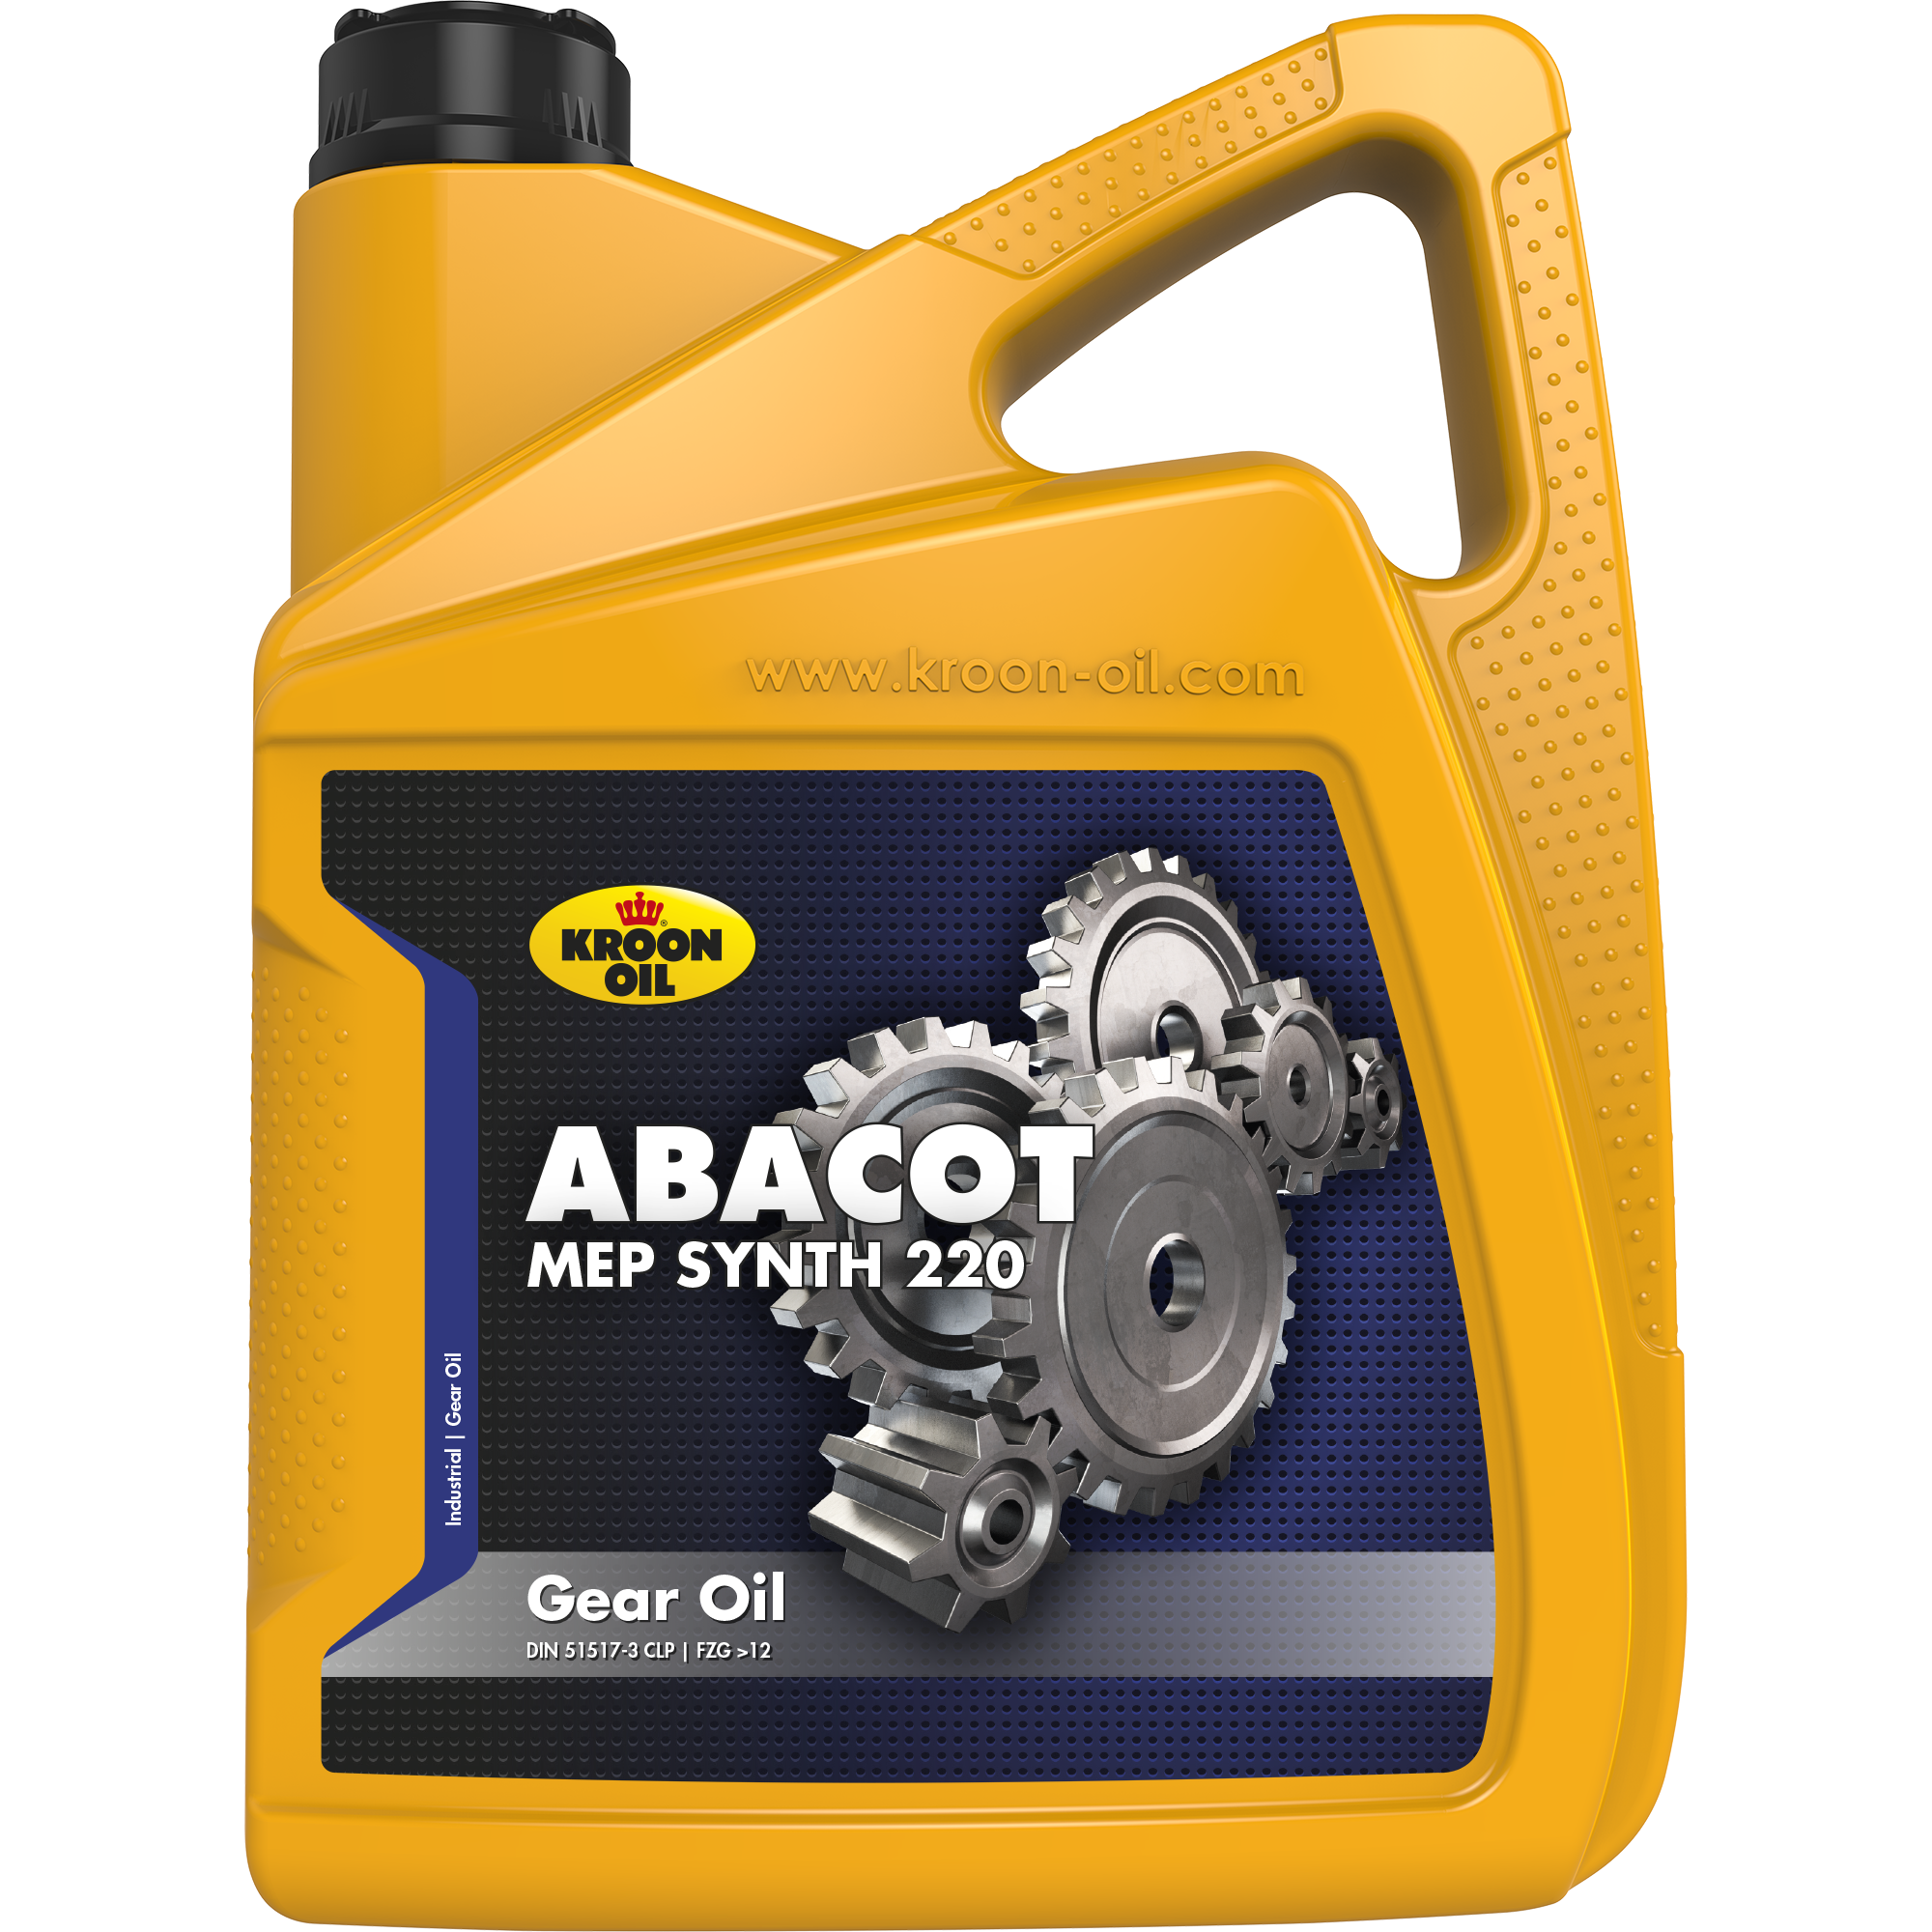 Kroon-Oil Abacot MEP Synth 220, 4 x 5 lt detail 2